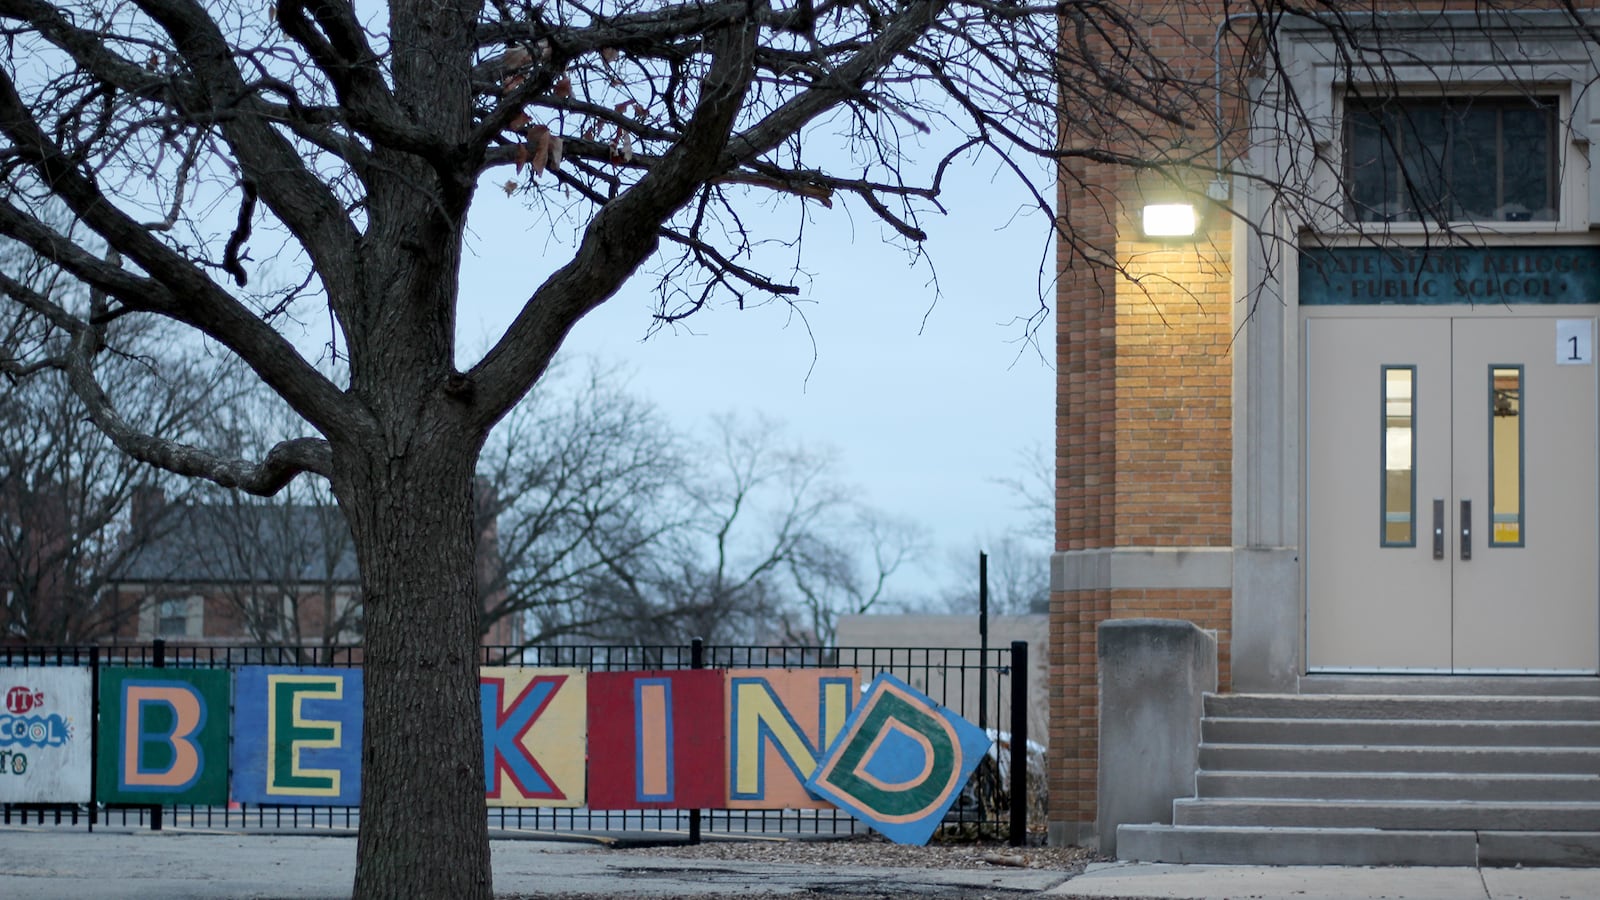 A sign that reads "Be Kind" is on display on a fence next to an entrance of a school with a tree in the foreground.